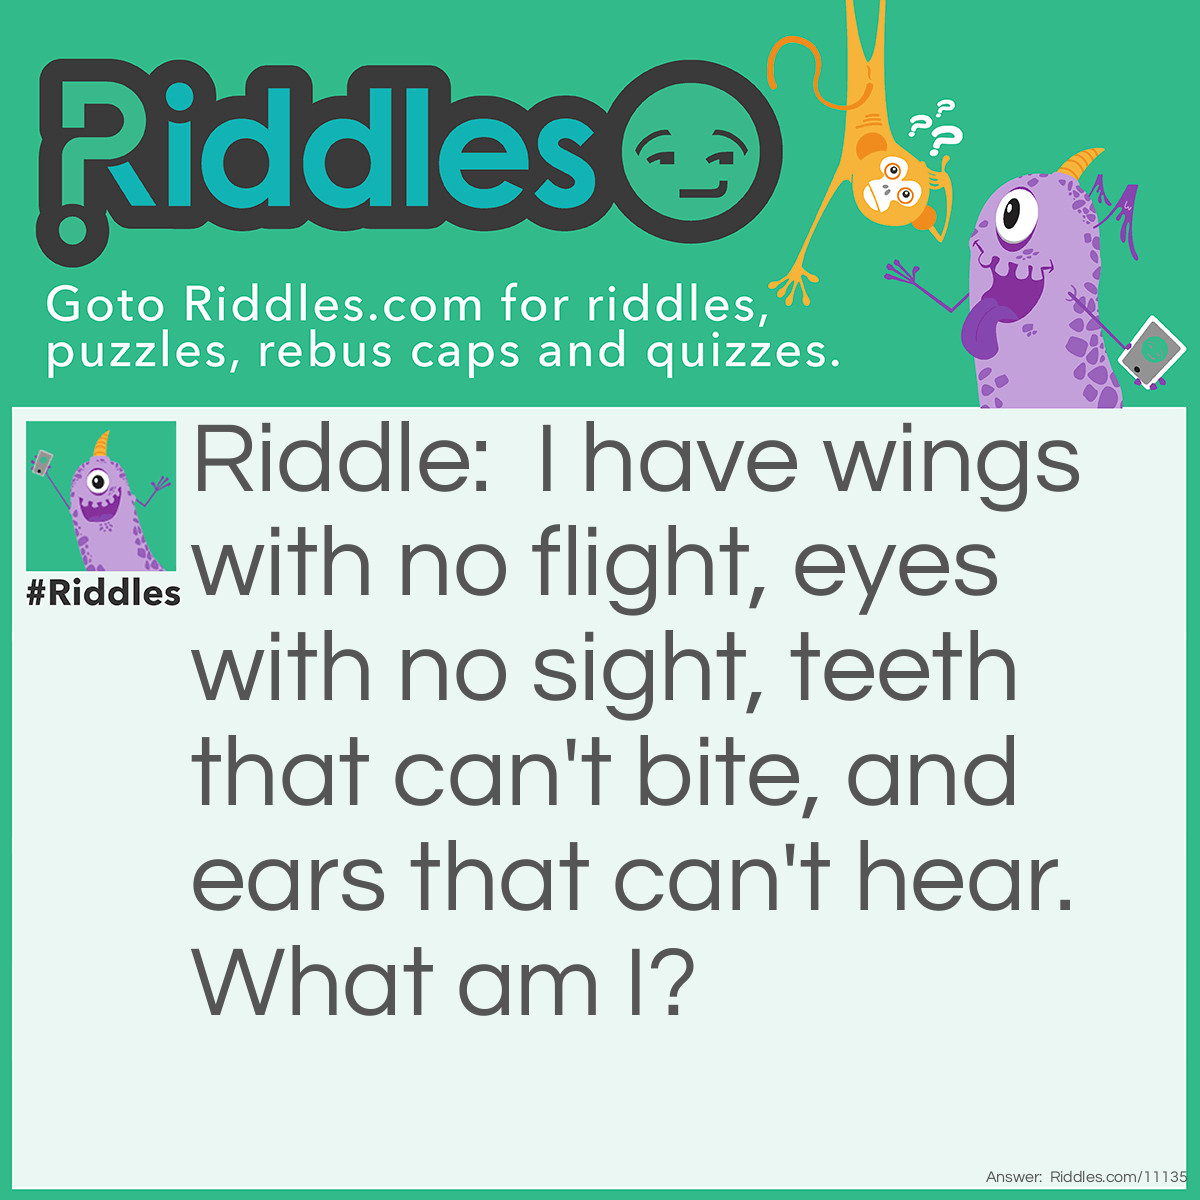 Riddle: I have wings with no flight, eyes with no sight, teeth that can't bite, and ears that can't hear. What am I? Answer: A gargoyle.